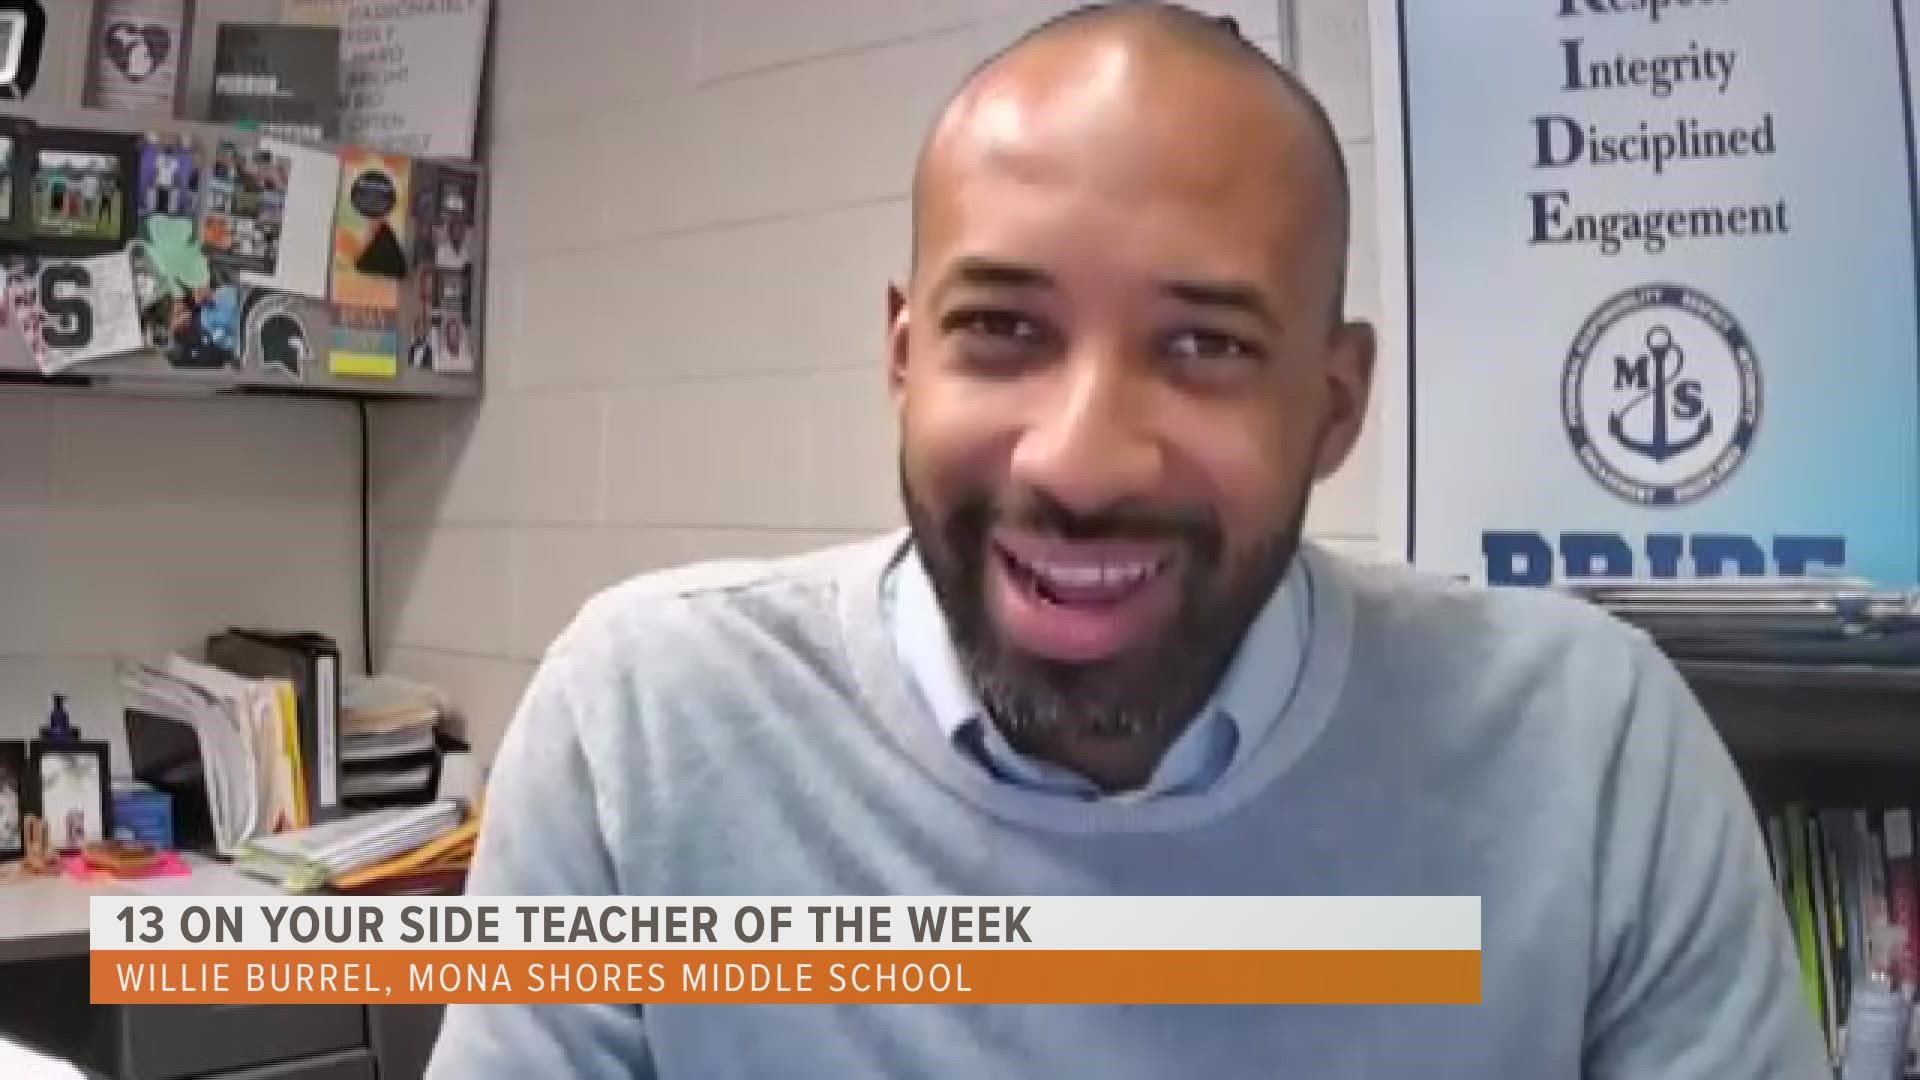 On May 2, the winner of Teacher of the Week was Mona Shores Middle School Assistant Principal Willie Burrel.